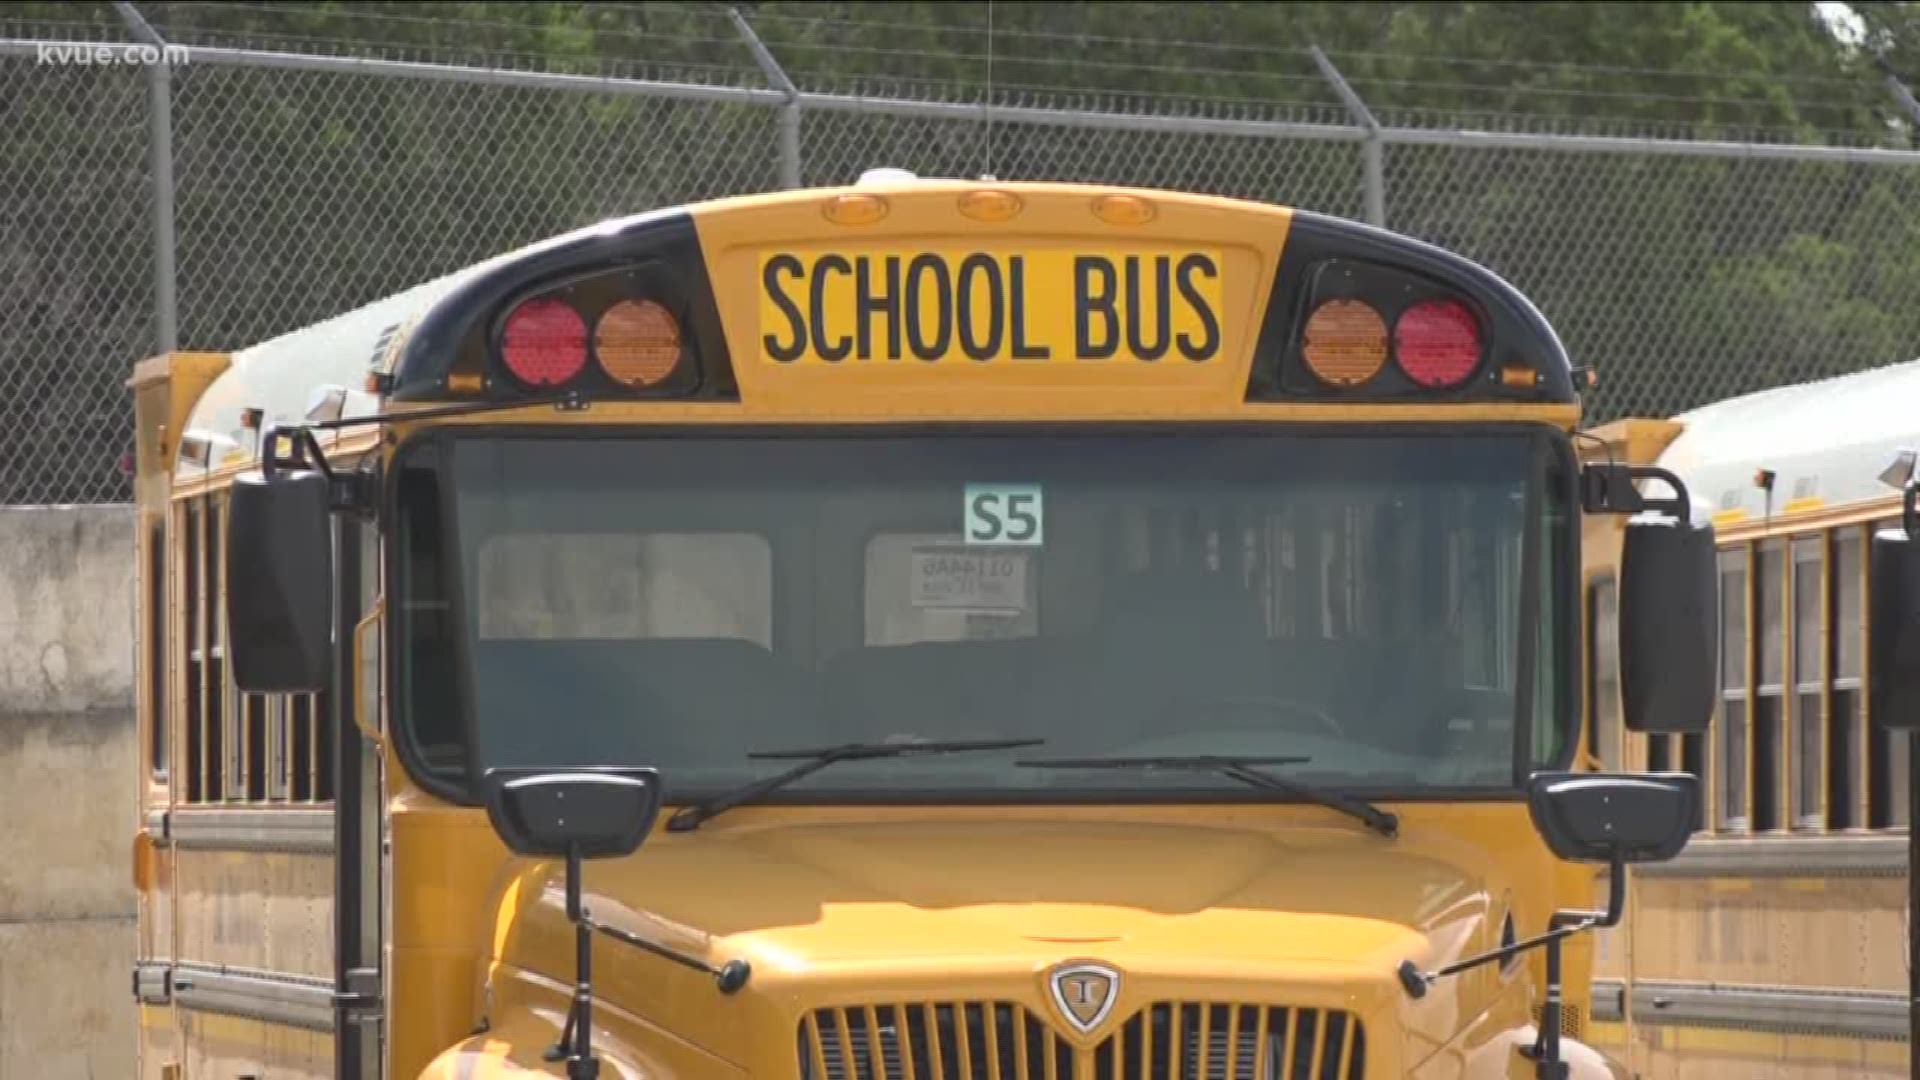 Bus drivers at Lake Travis ISD will get a pay increase starting at $20 an hour. The school board voted to increase the pay.